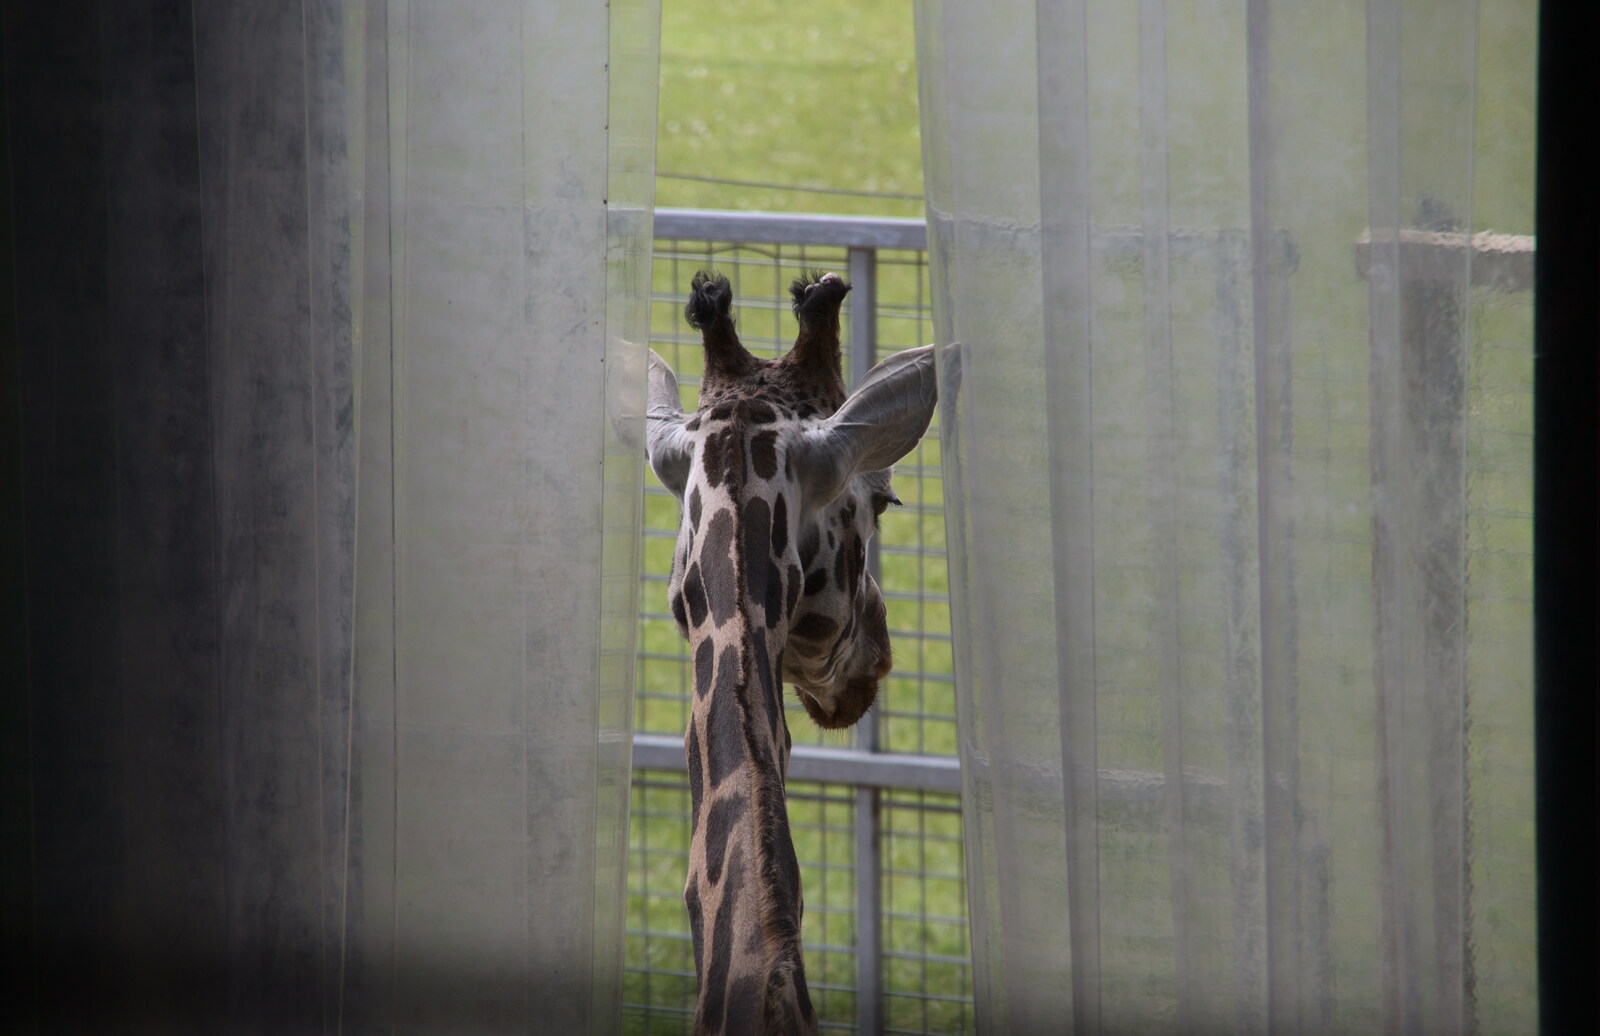 A giraffe wanders outside from A Moth Infestation and a Trip to the Zoo, Banham, Norfolk - 21st May 2022